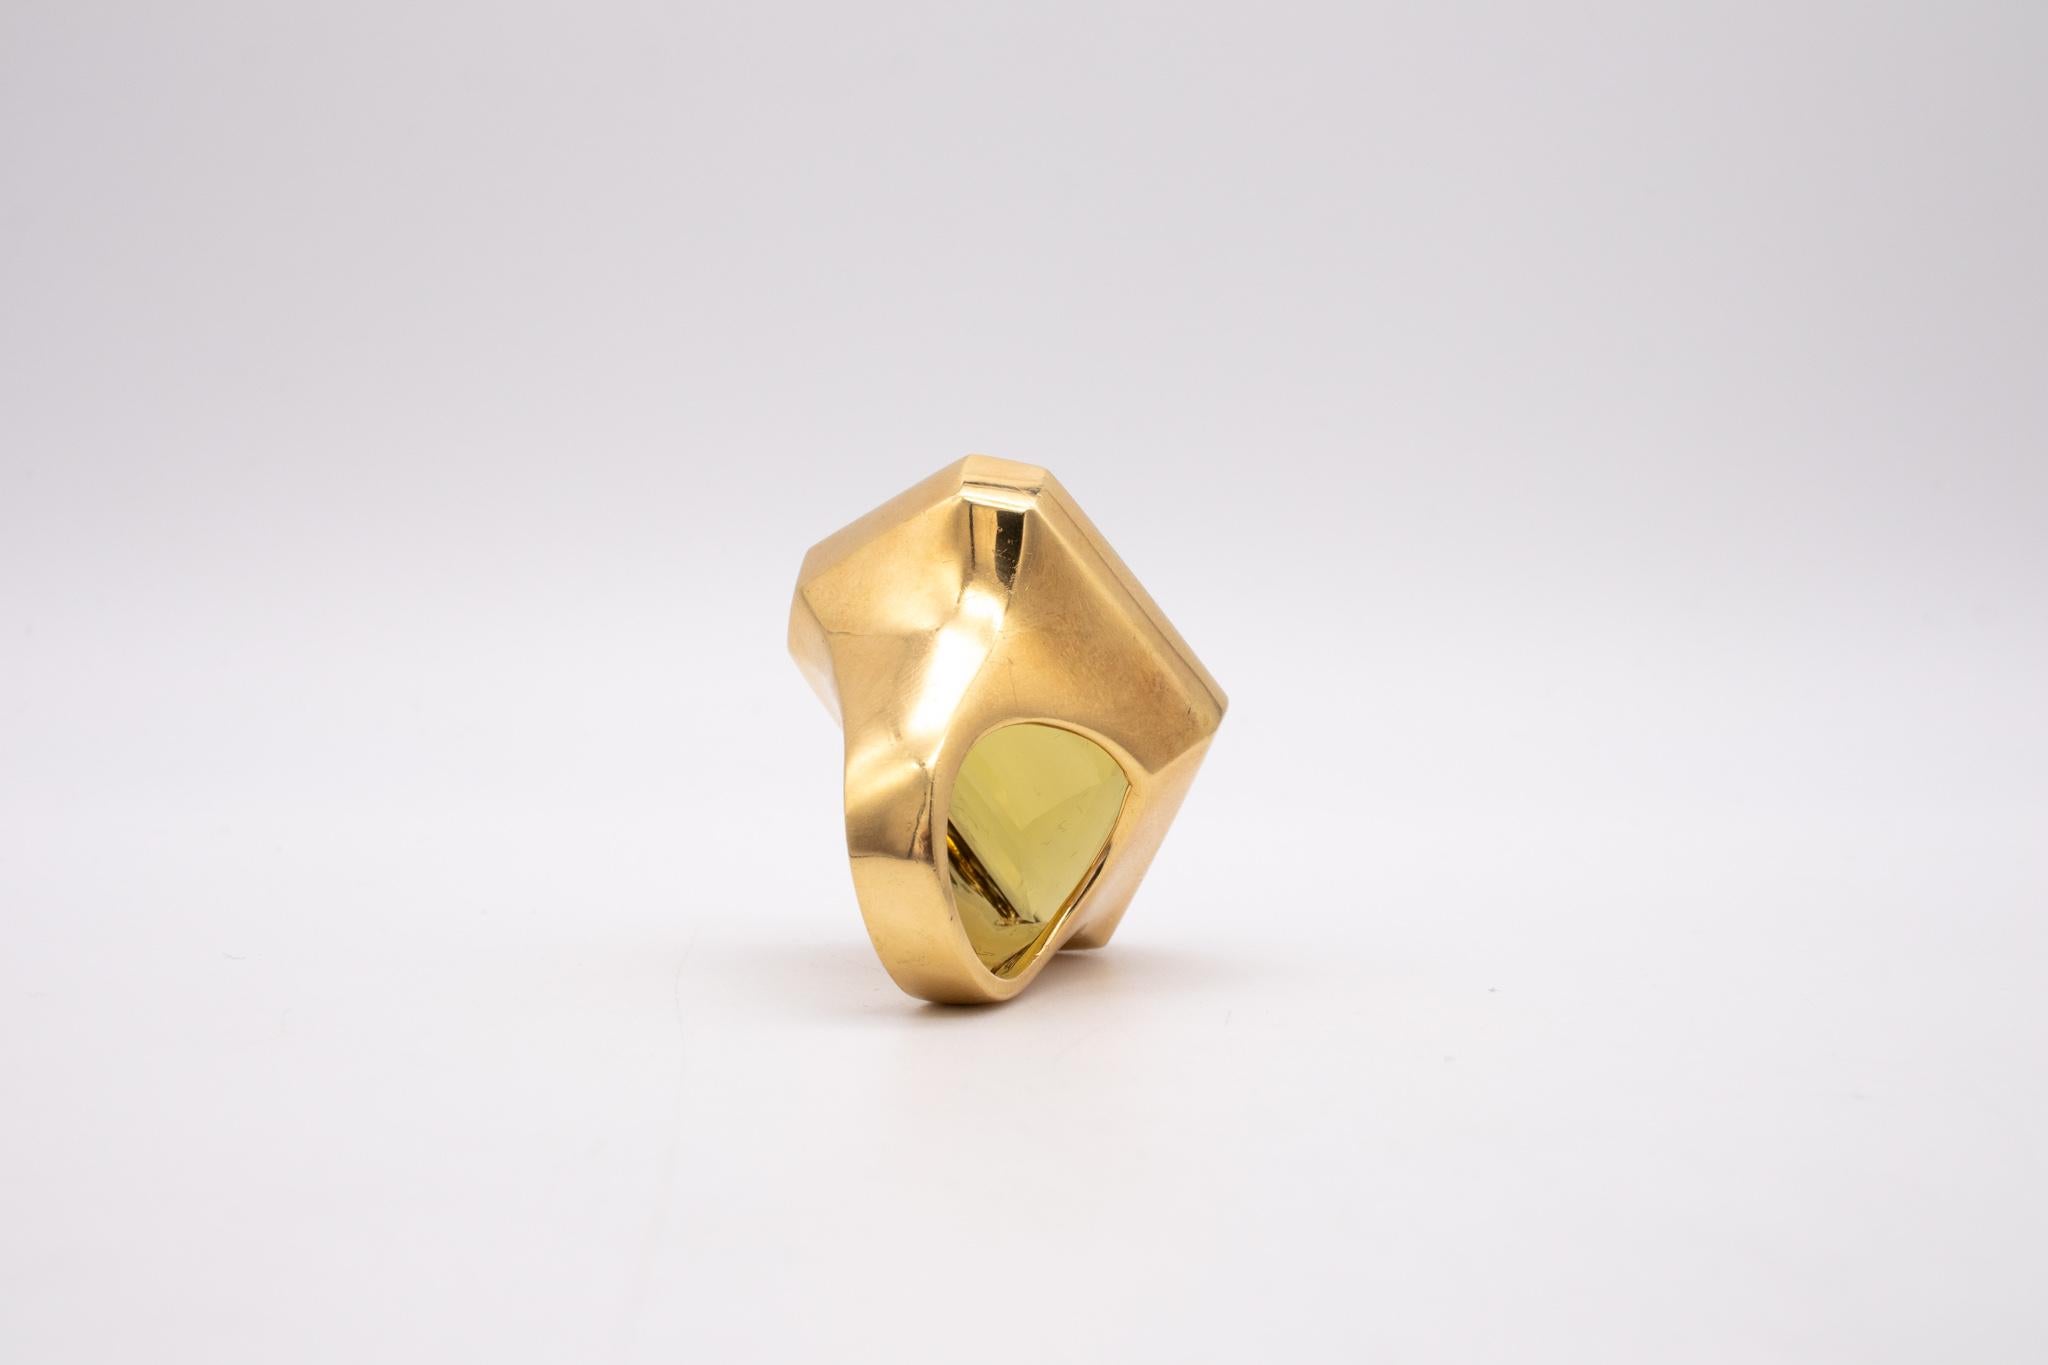 Tony Duquette Massive Geometric Cocktail Ring 18 Karat Yellow Gold 85cts Citrine For Sale 2